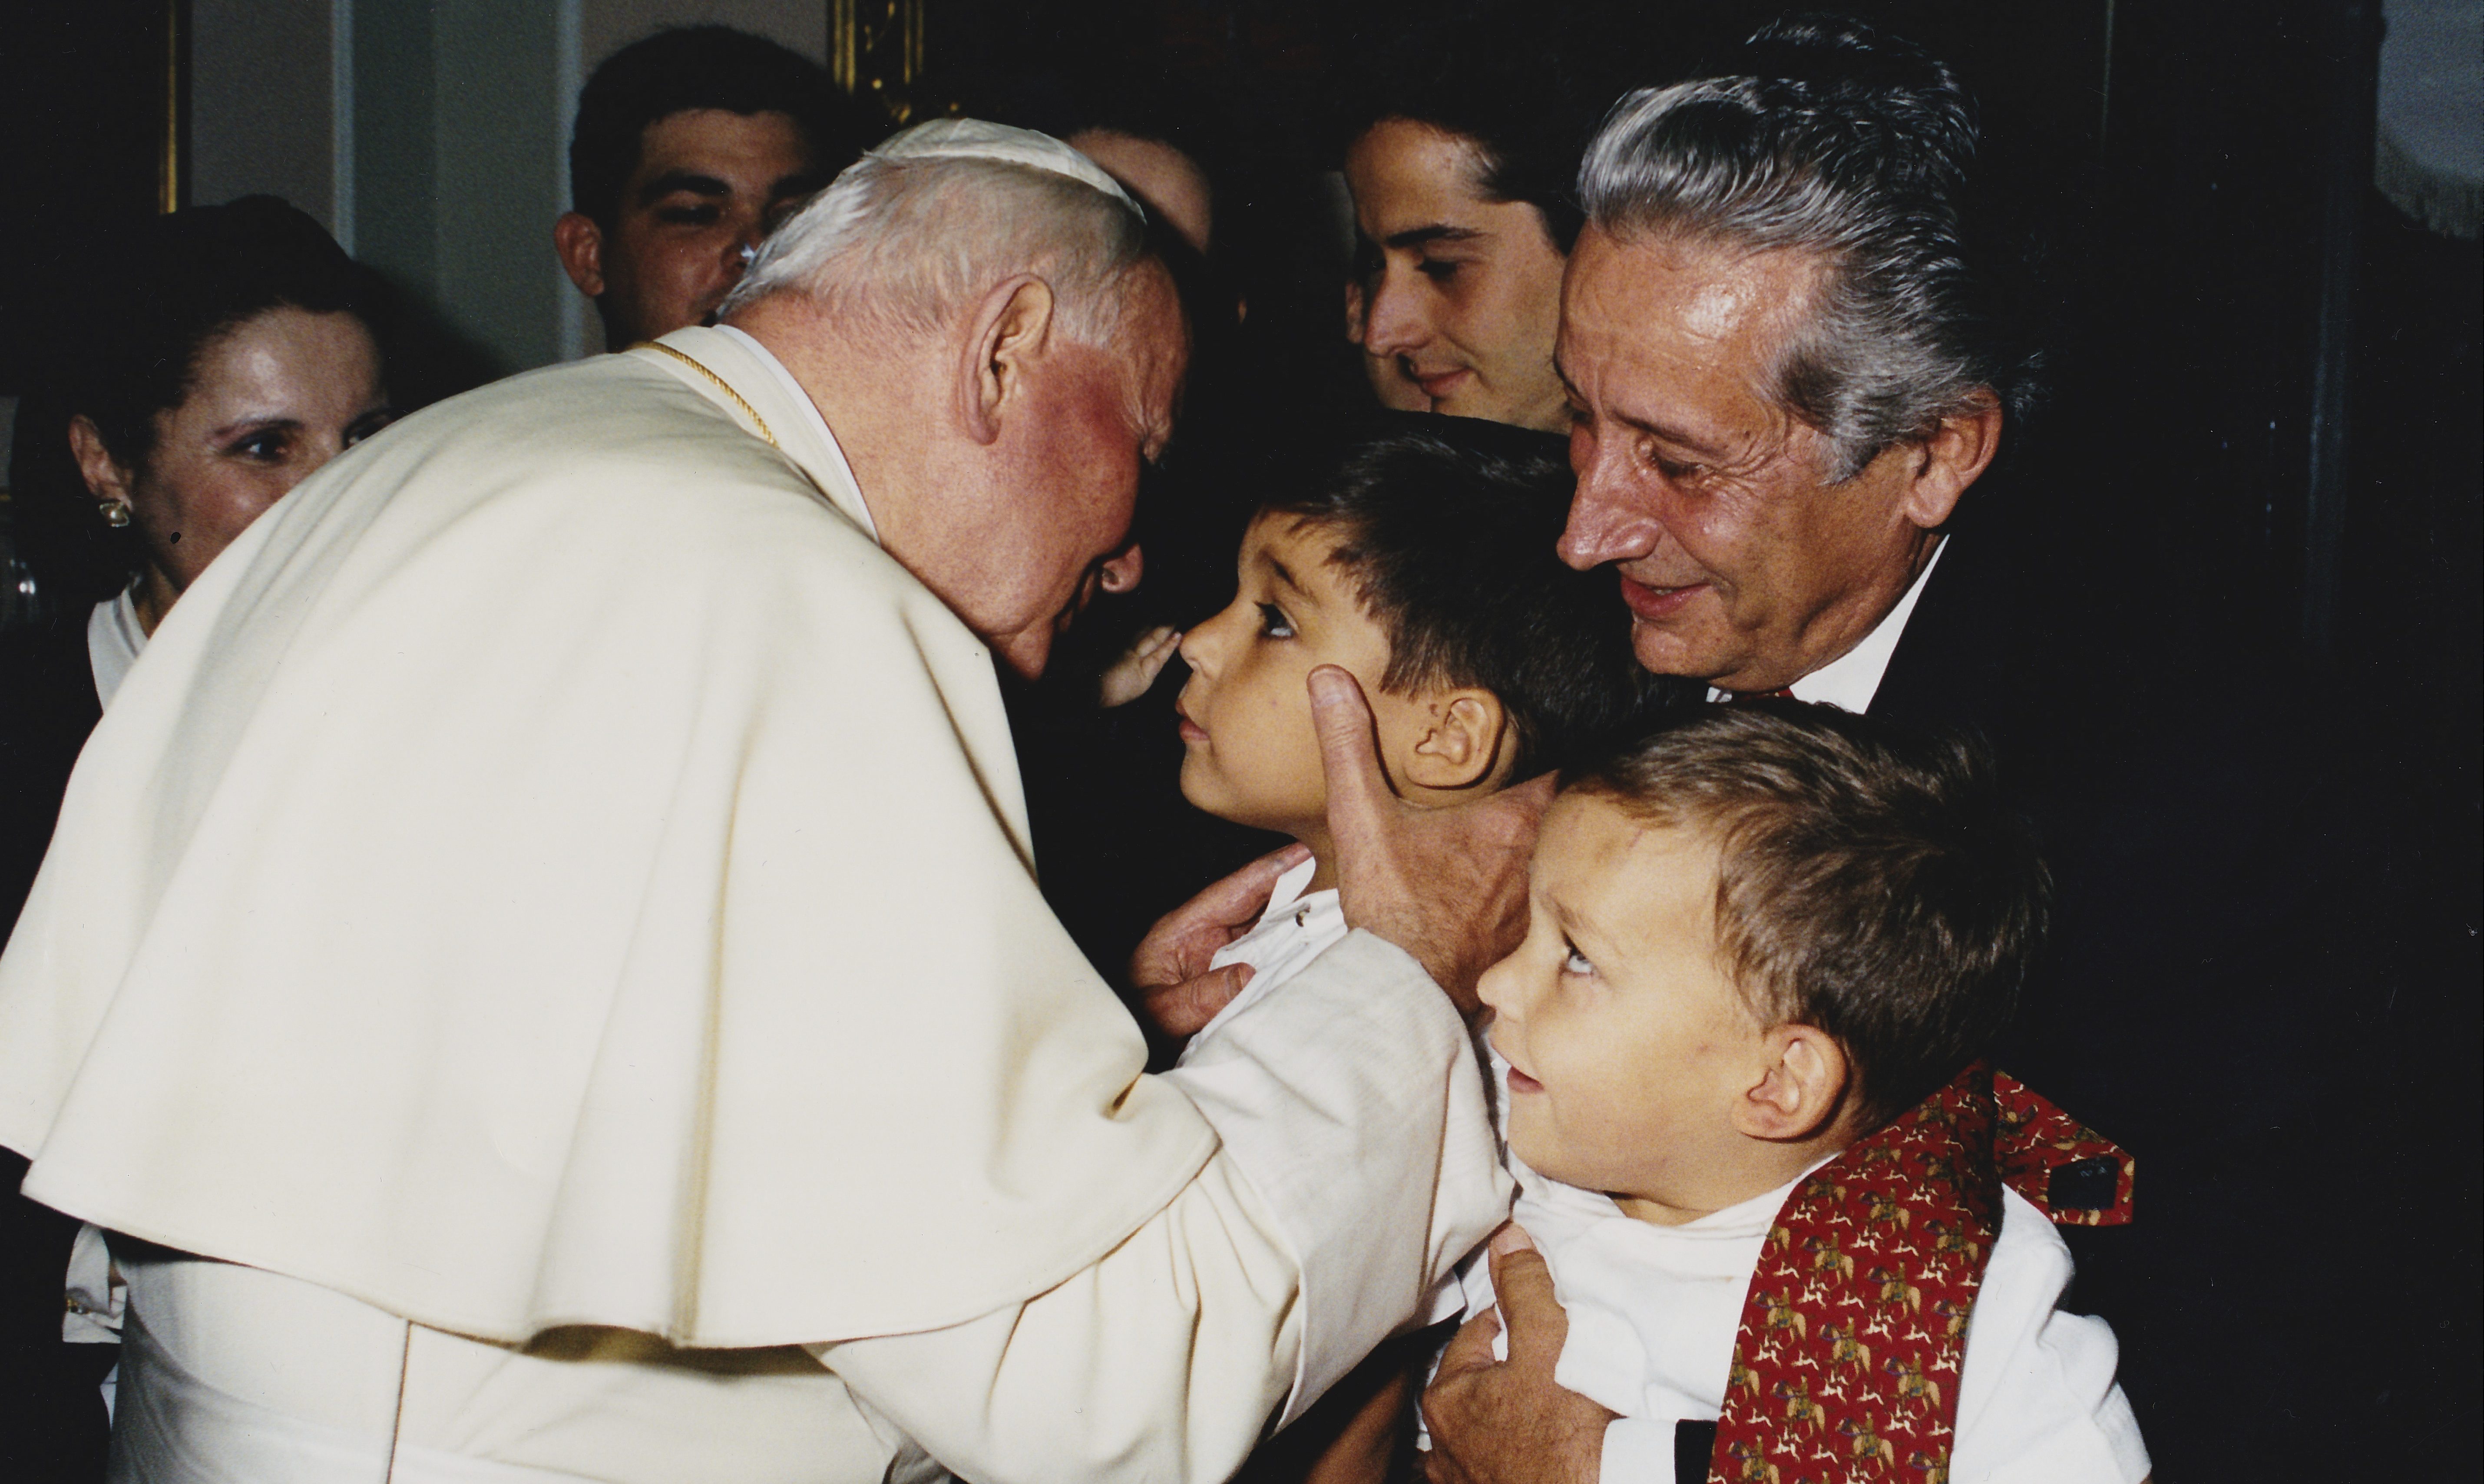 Image: Young Br. Josemaría and his family with Pope St. John Paul II.